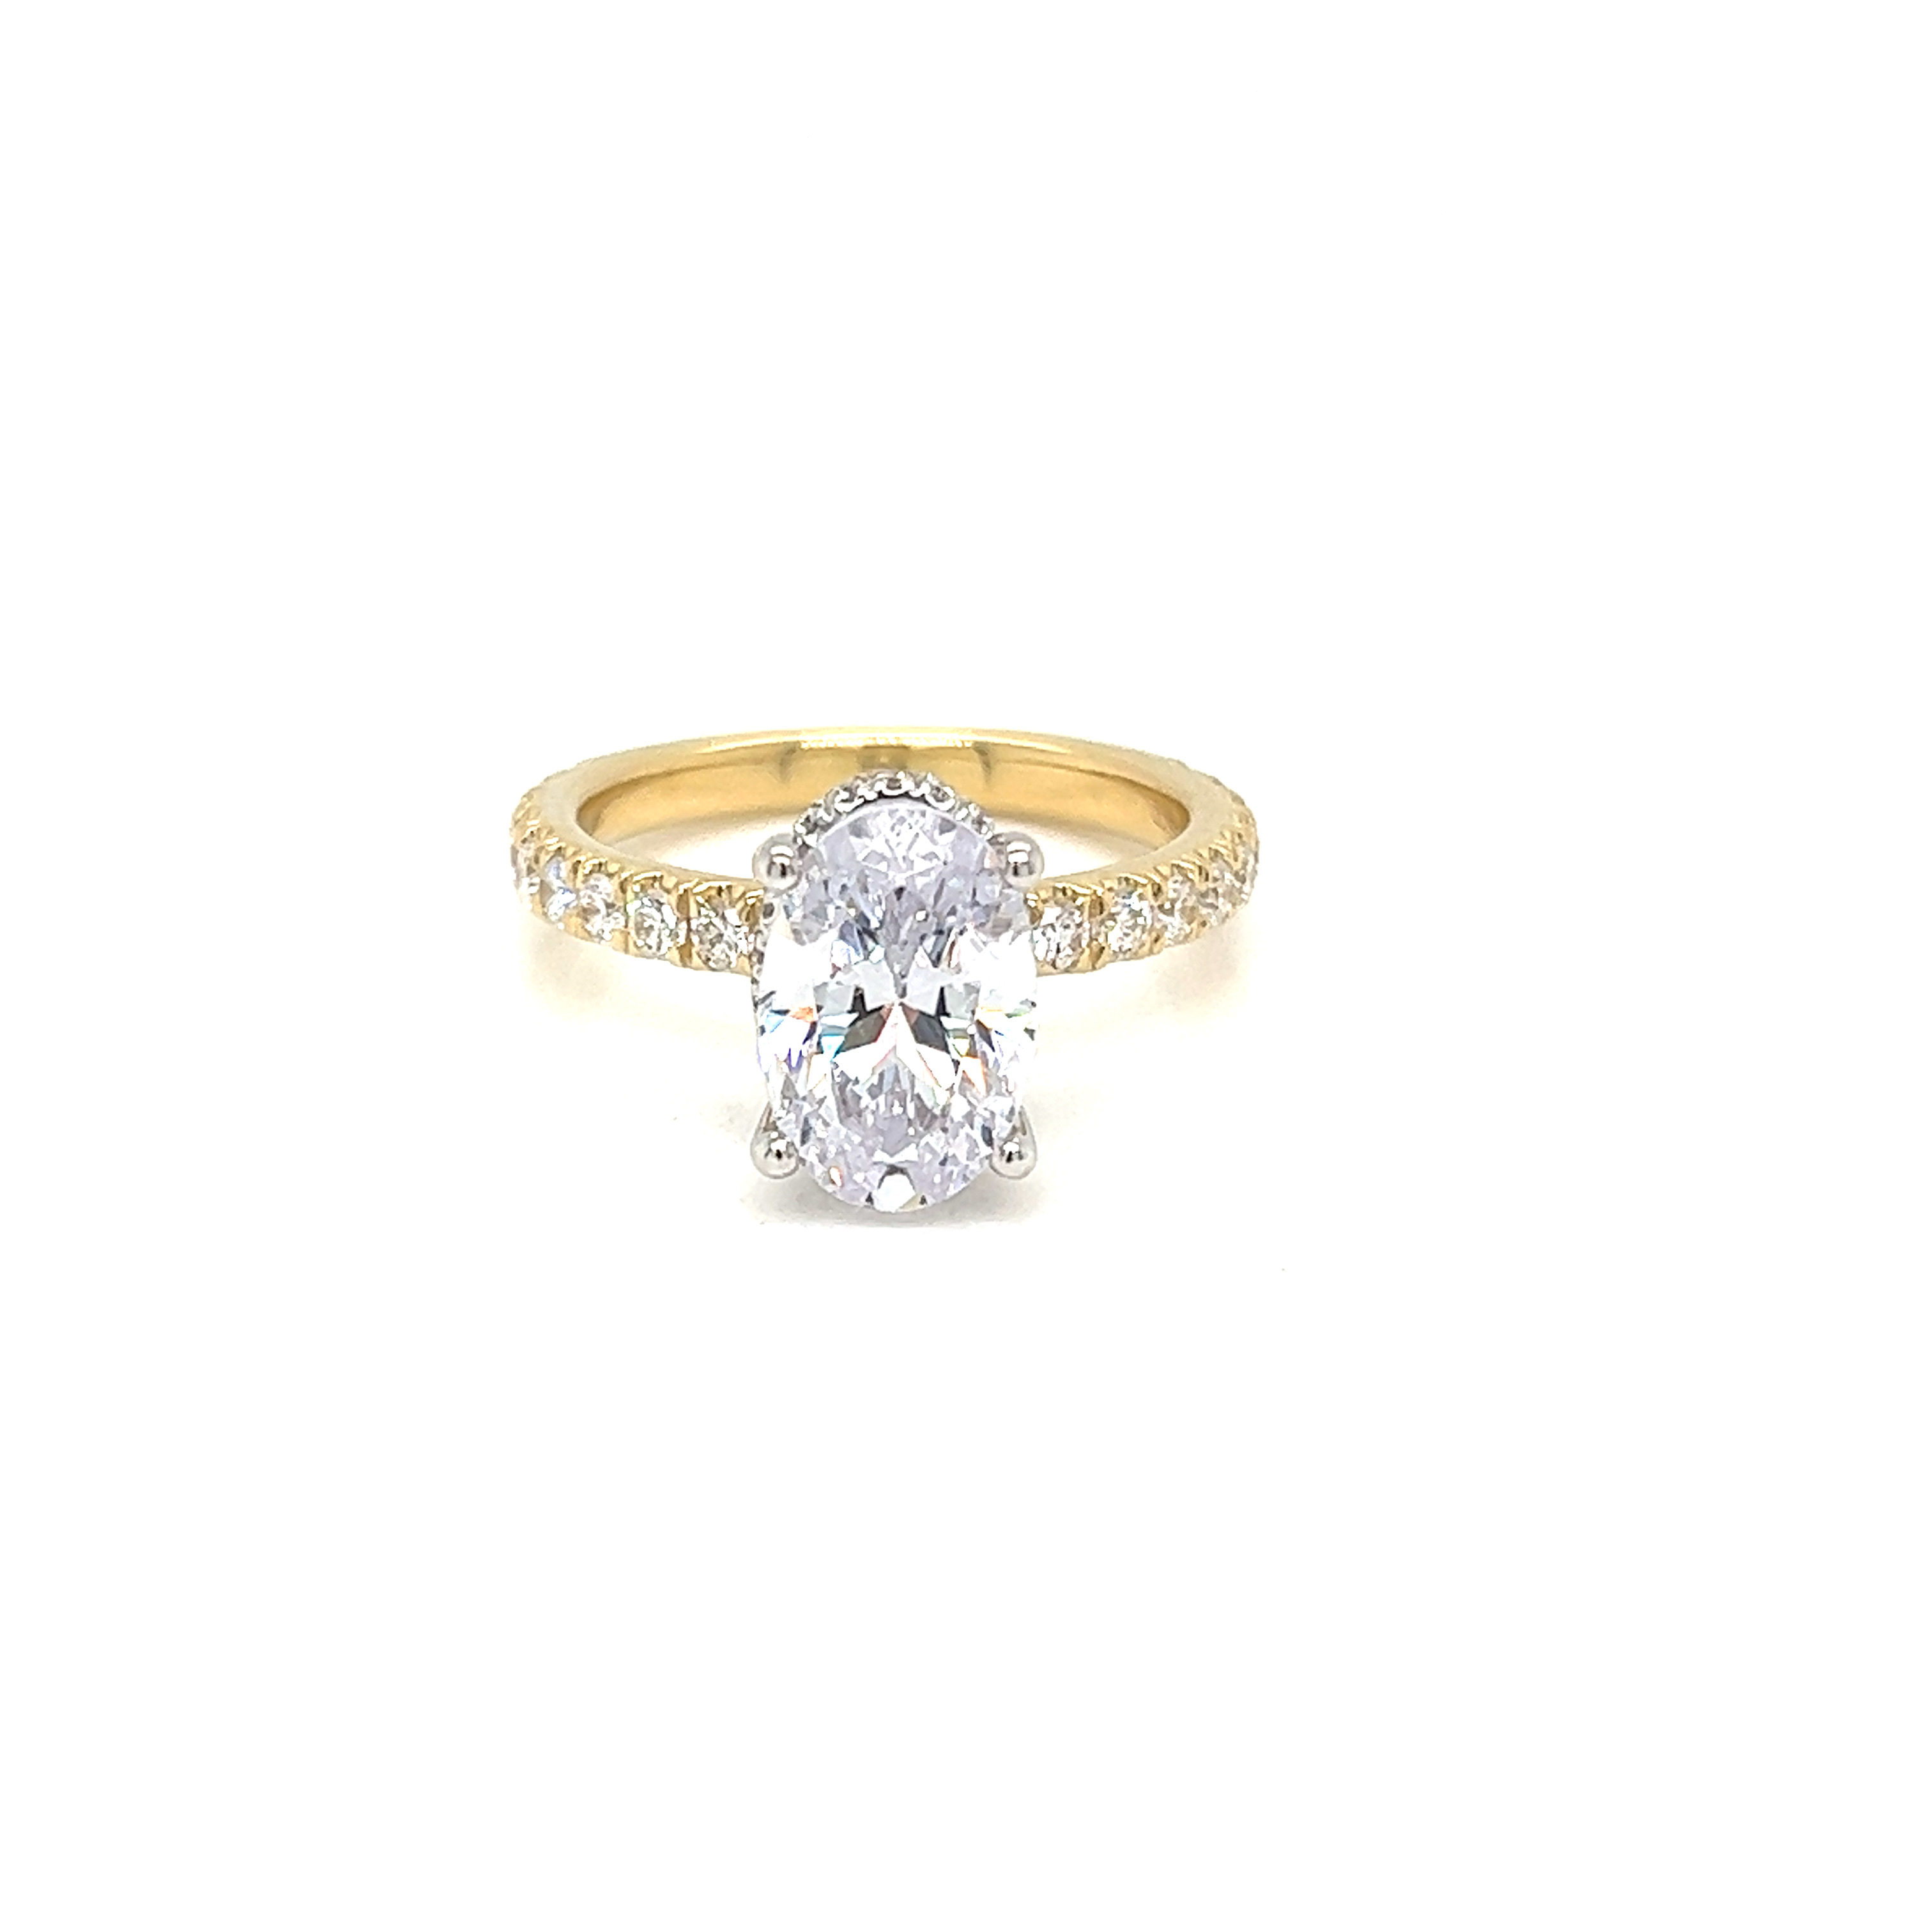 14 Karat yellow gold semi mount engagement ring Size 6.5 with 42=0.71 total weight round brilliant G VS Diamonds